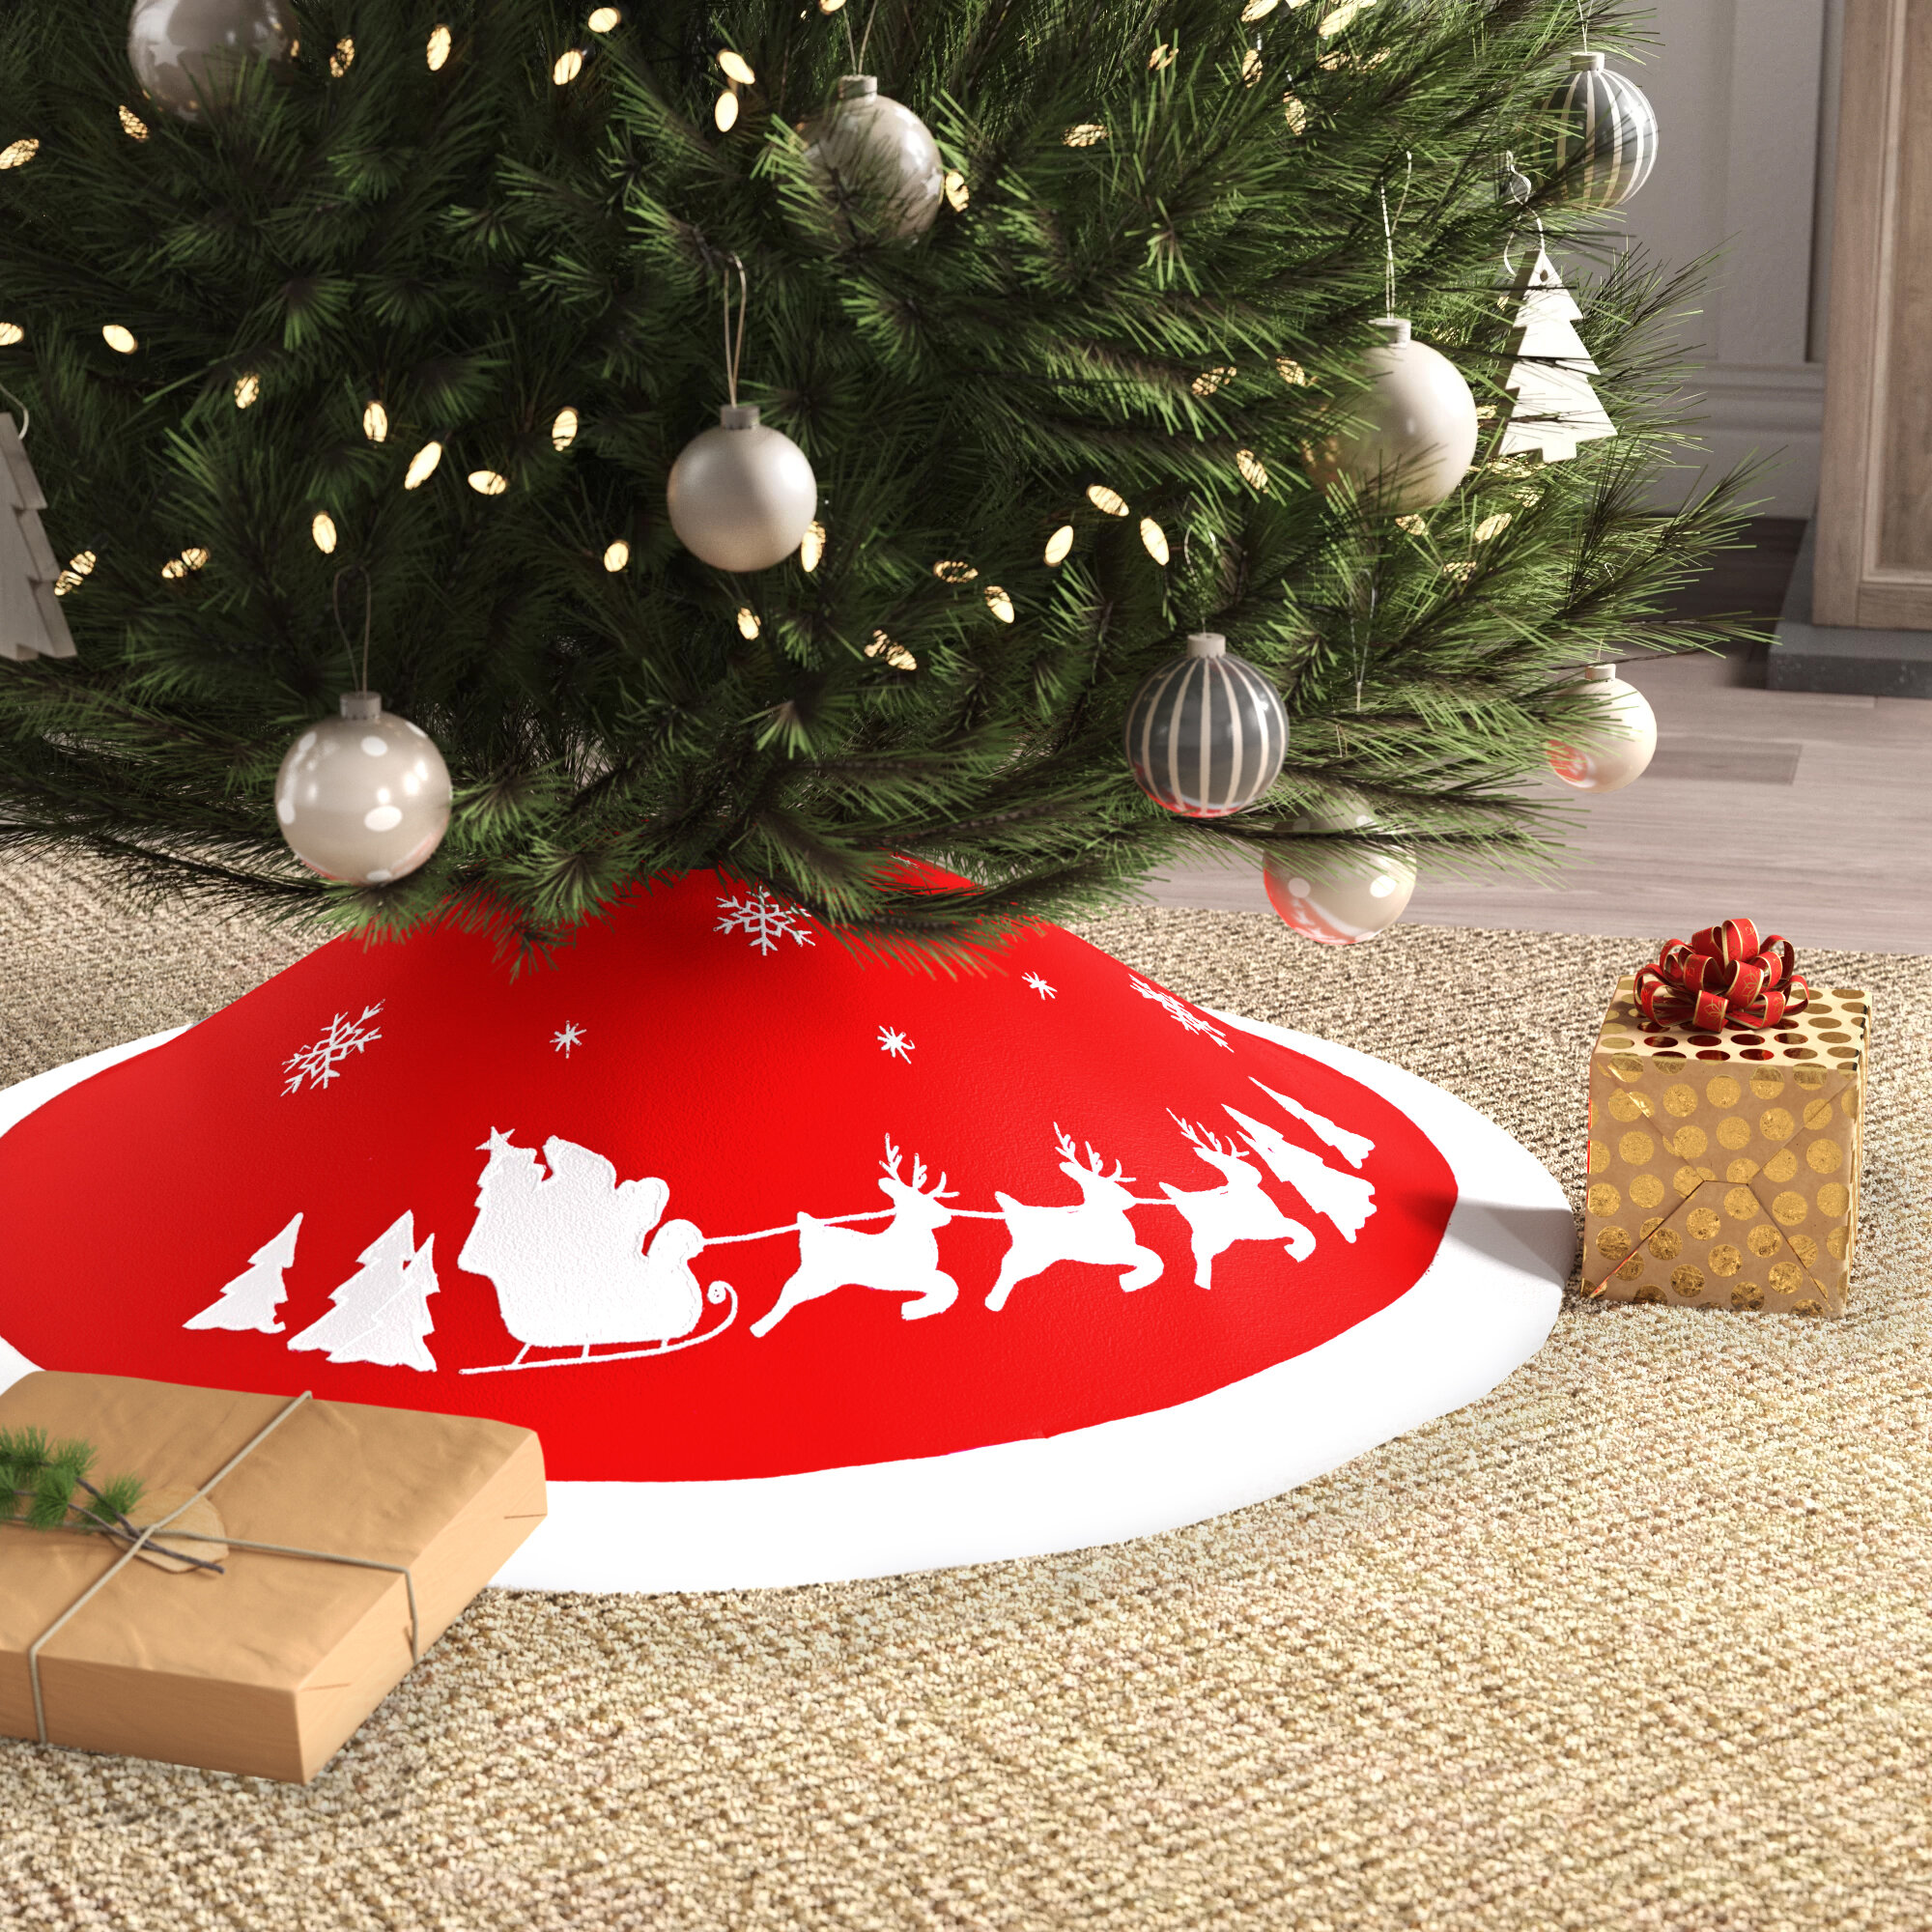 Christmas Ornaments Round Gold Red Tree Skirt Base Floor Mat Cover Xmas Decor 